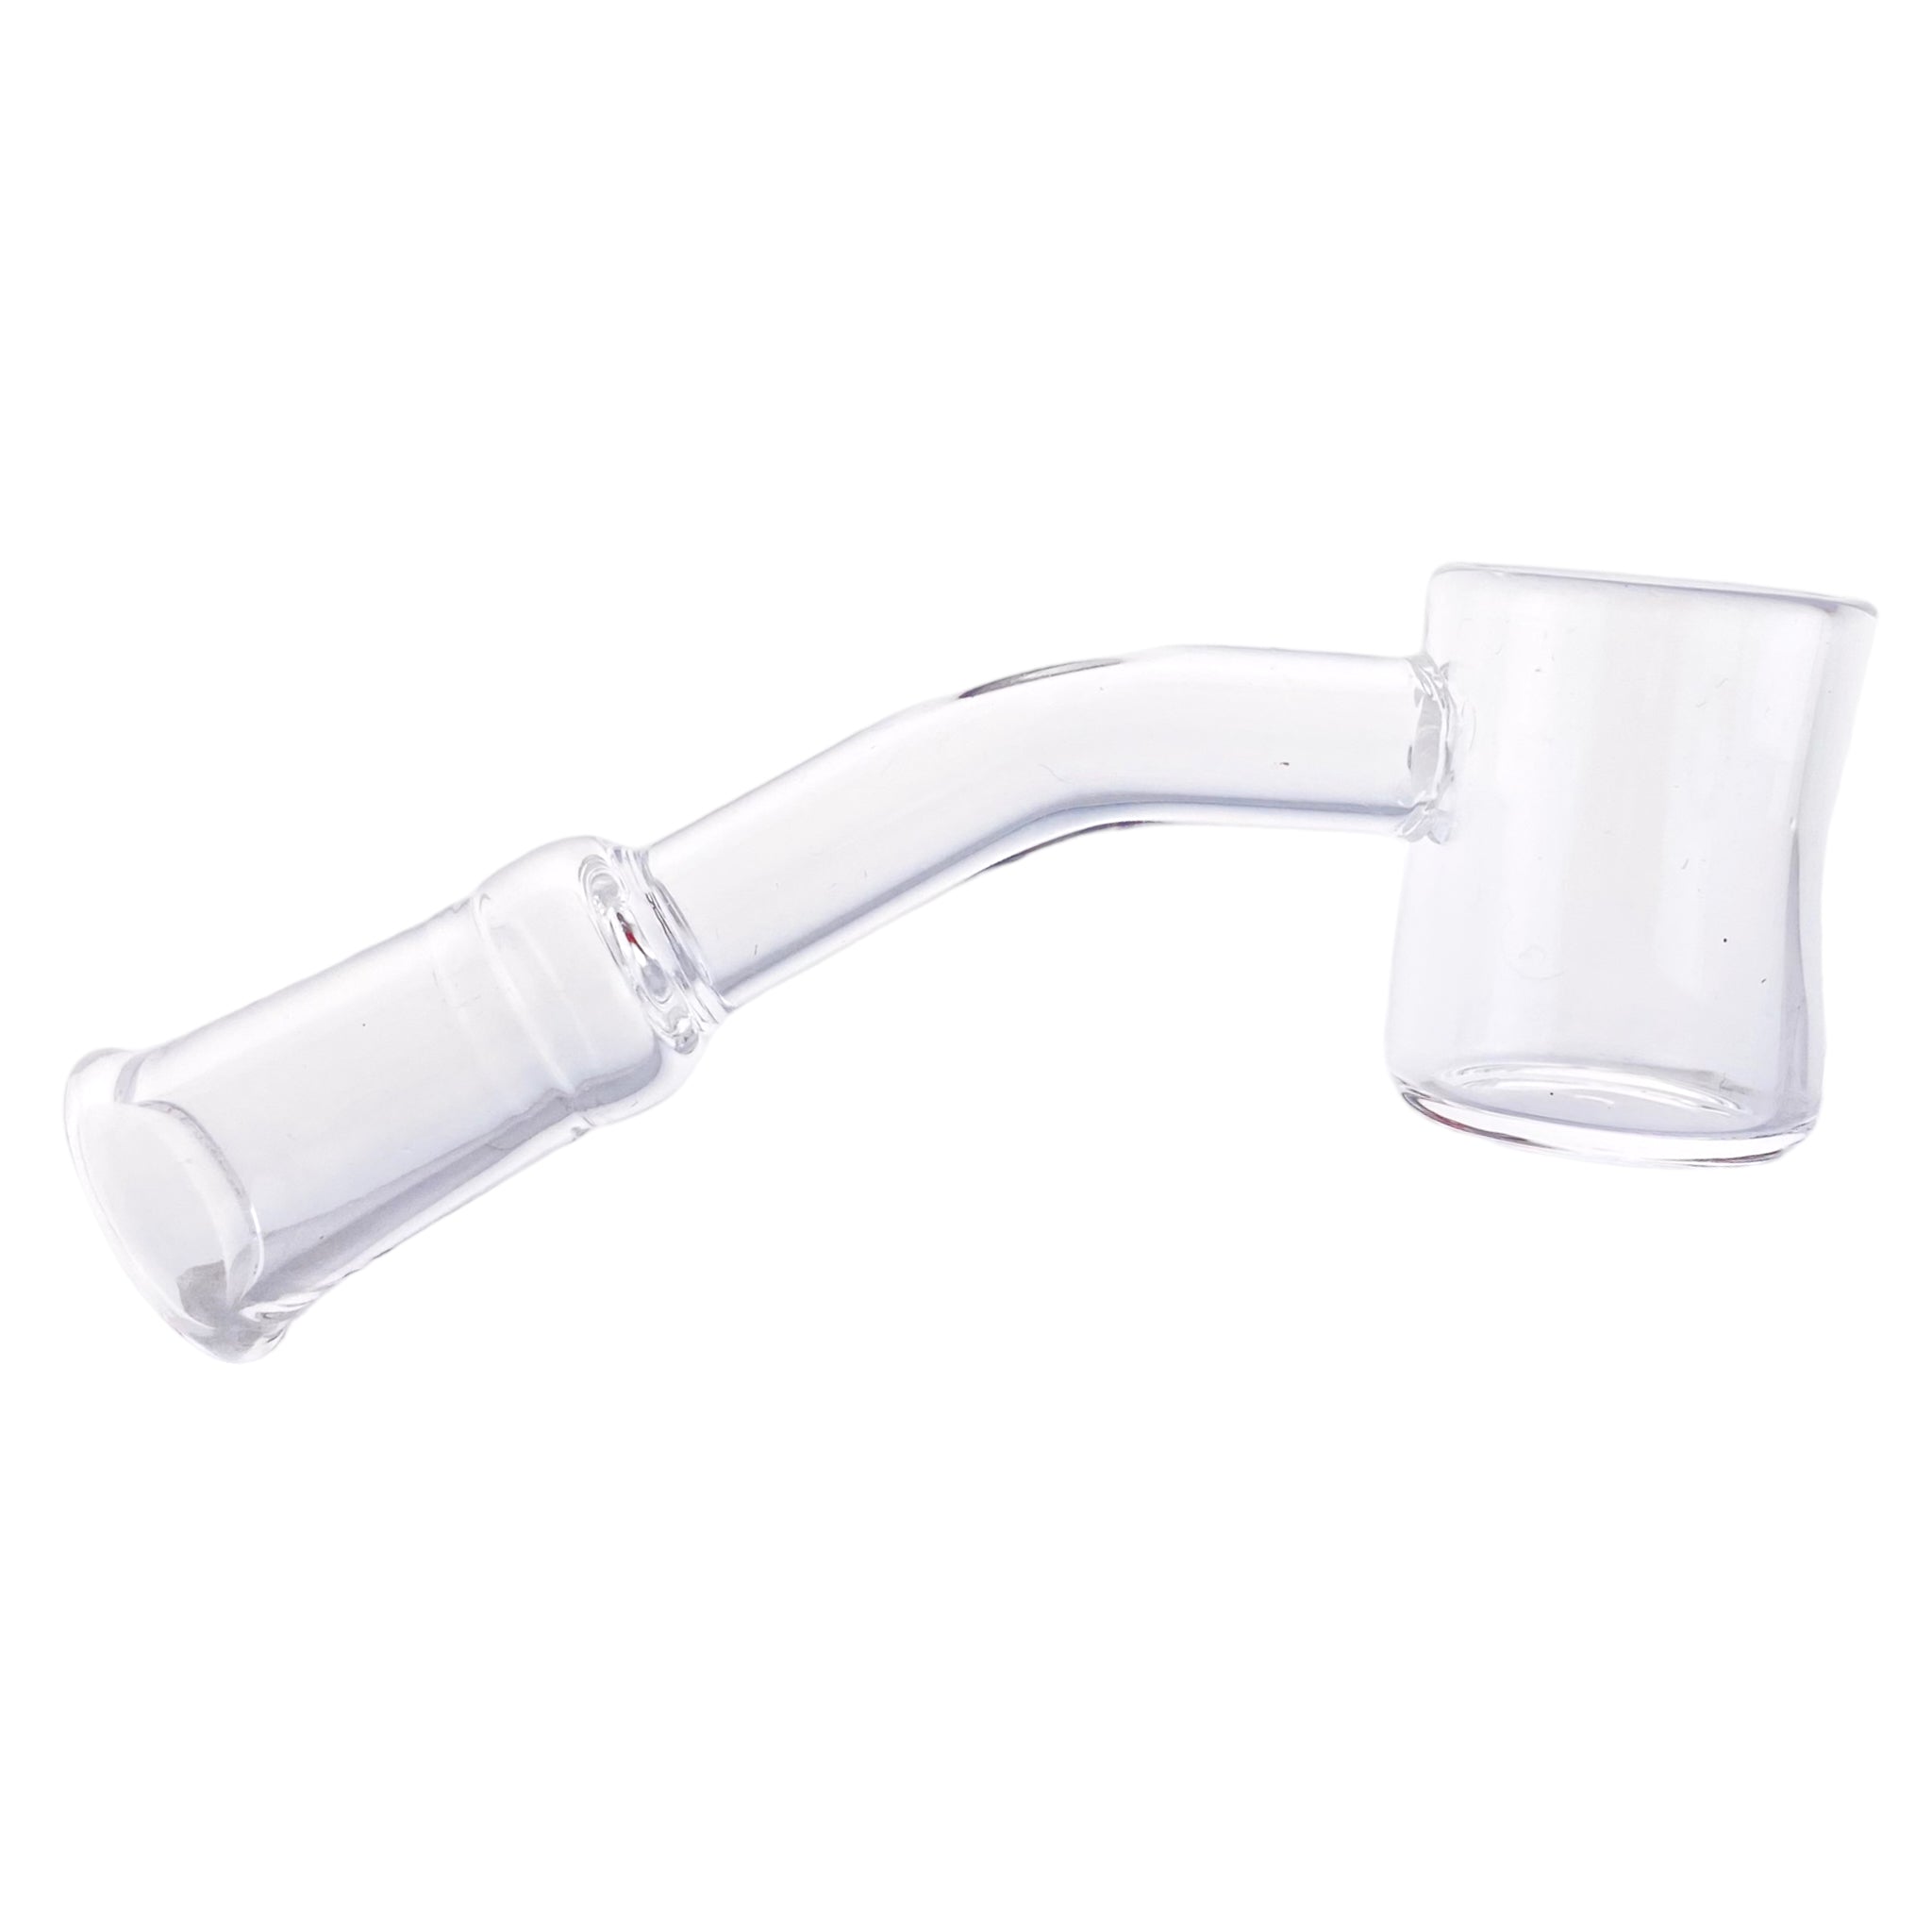 10mm Quartz Banger With 45 Degree Female Fitting And 20mm Wide Bucket